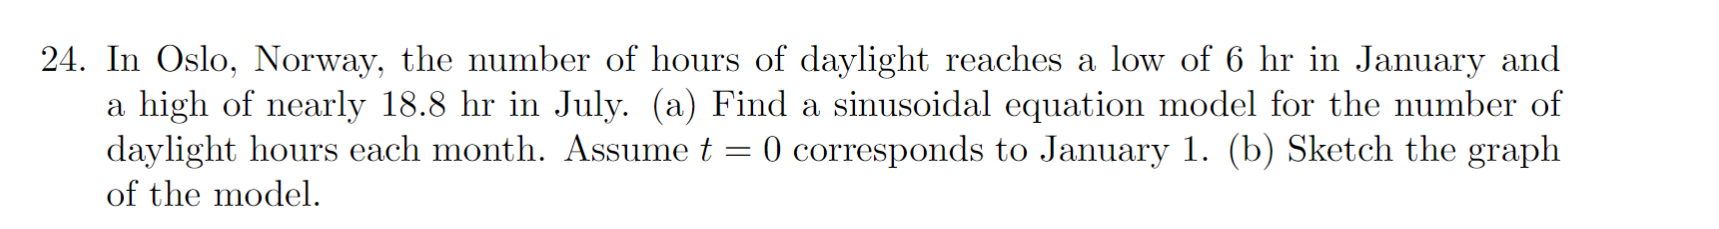 24. In Oslo, Norway, the number of hours of daylight reaches a low of 6 hr in January and
a high of nearly 18.8 hr in July. (a) Find a sinusoidal equation model for the number of
daylight hours each month. Assume t 0 corresponds to January 1. (b) Sketch the graph
of the model.
